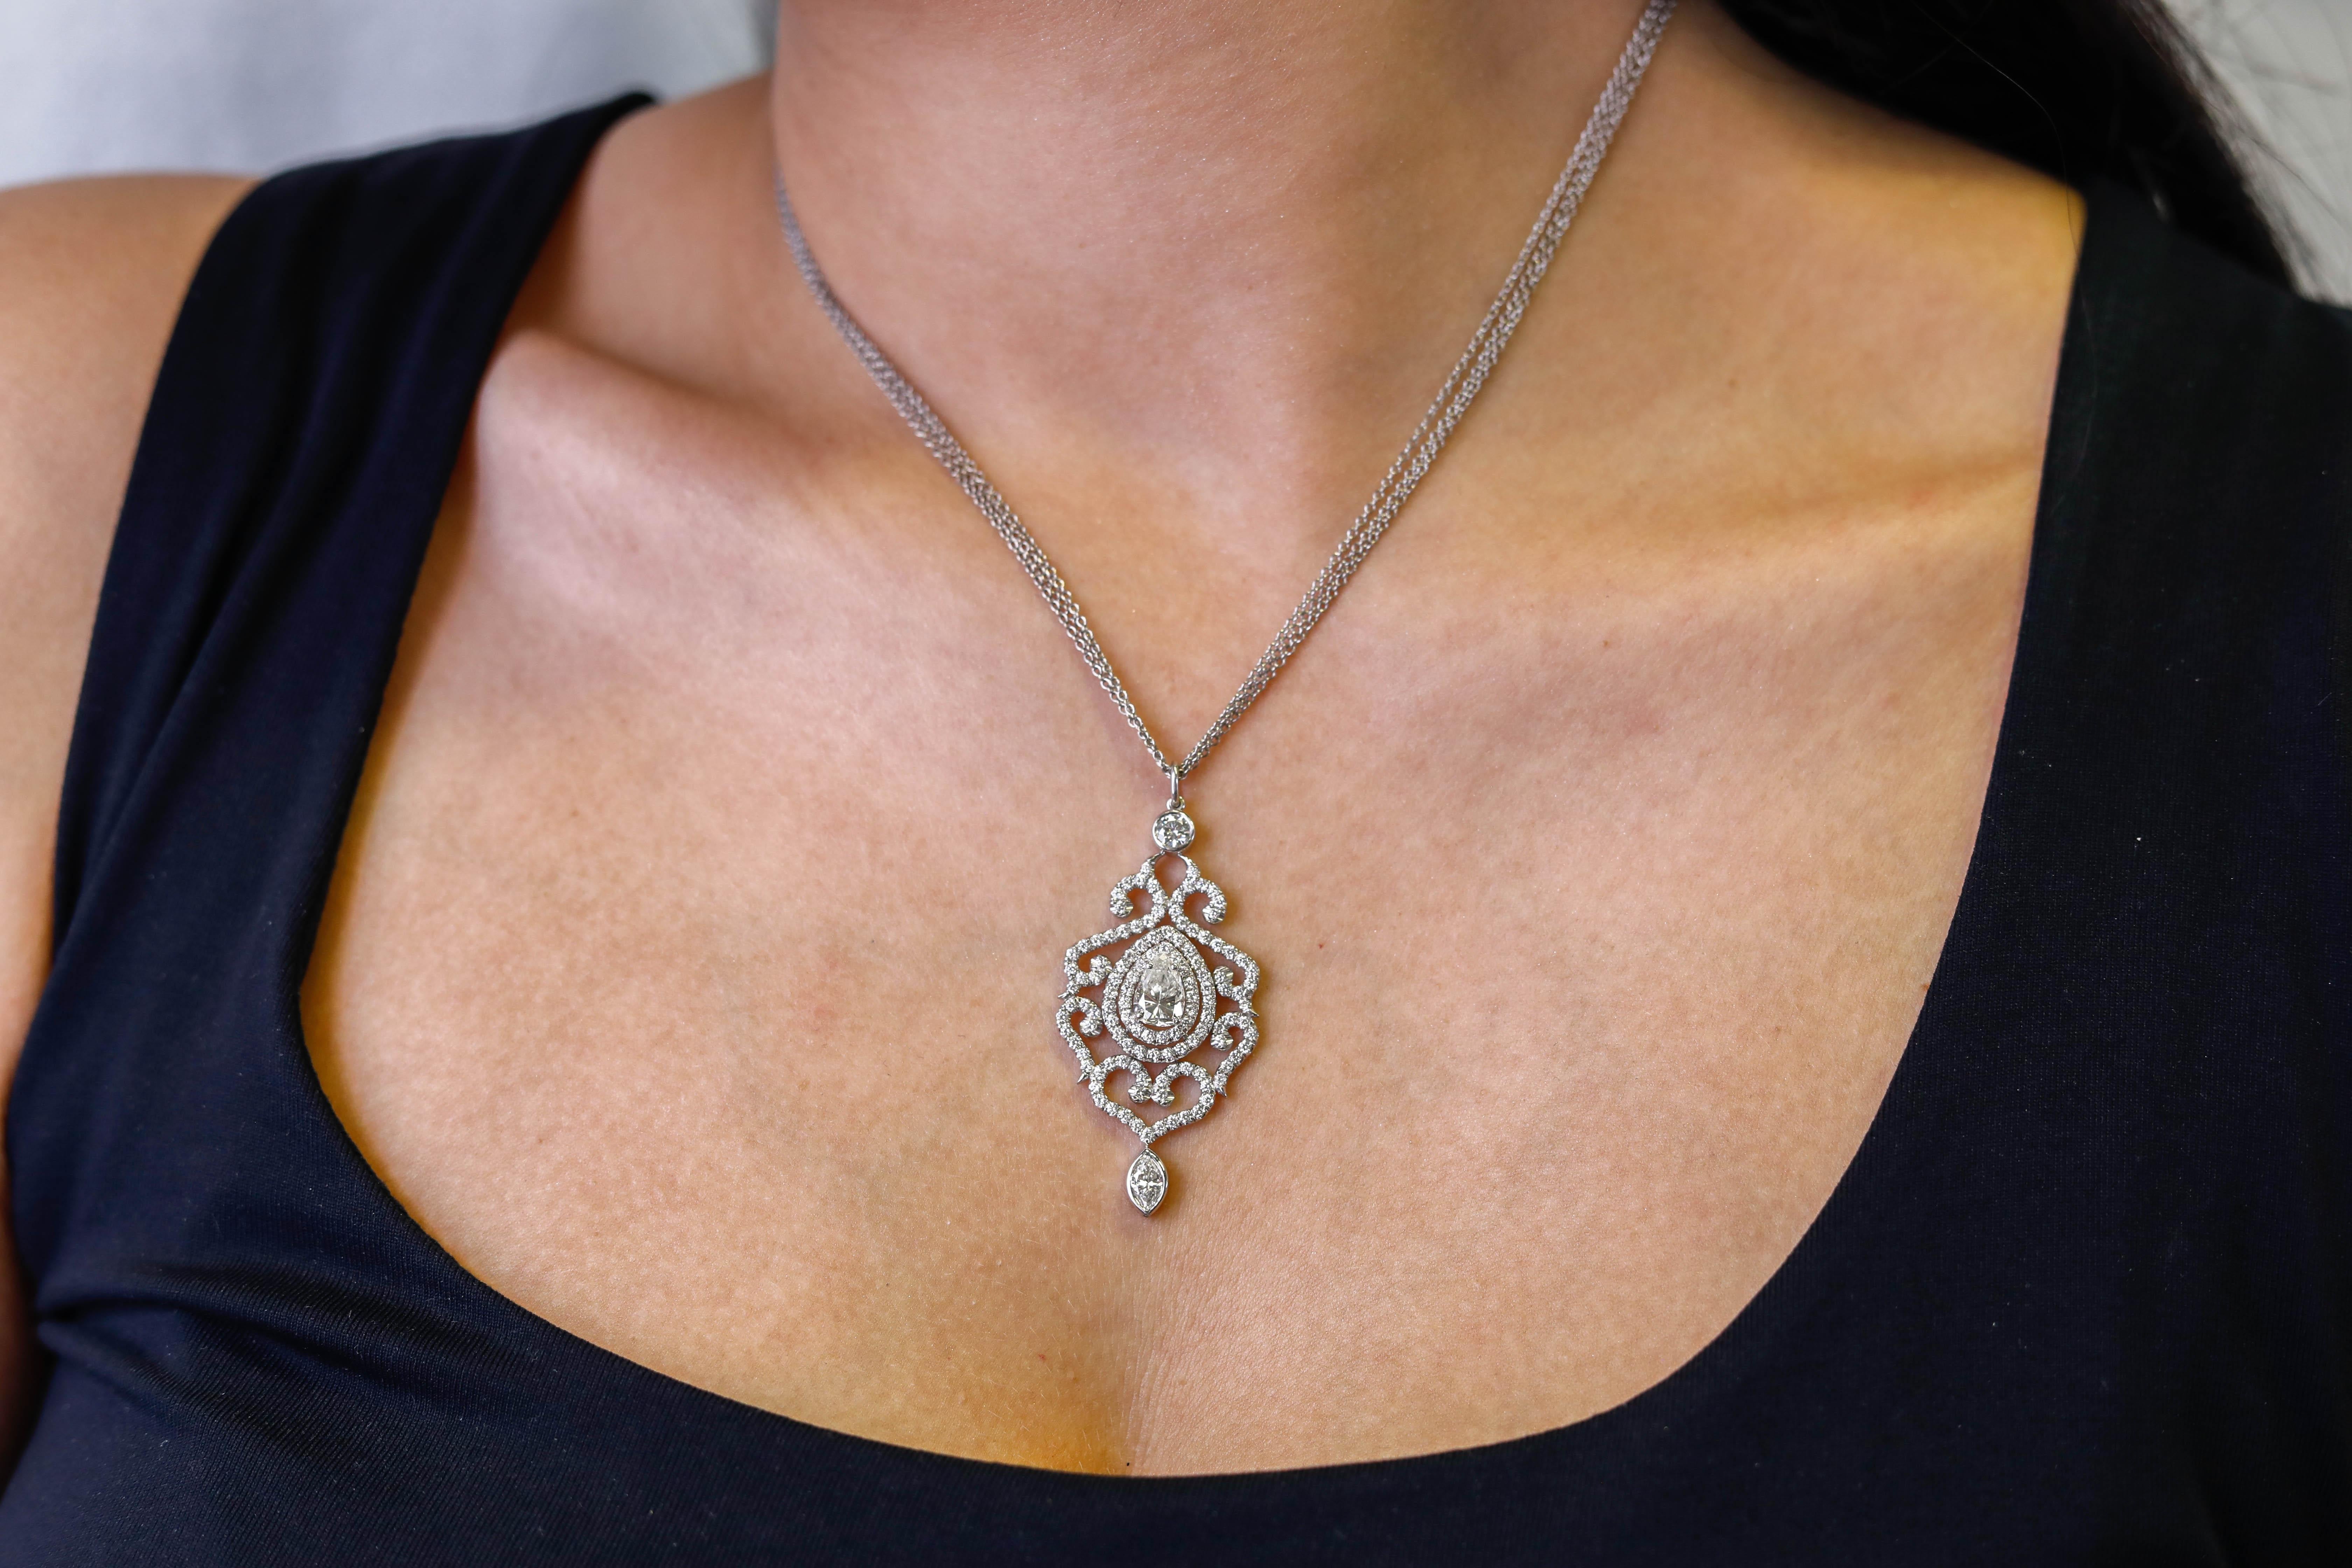 18 Karat White Gold and Platinum Diamond Filigree Pendant Fine Jewelry

An enchanting and elegant look. This pendant necklace presenting you with a filigree design, layered with glistening diamonds. Polished to a brilliant shine.

 Gold Purity: 18